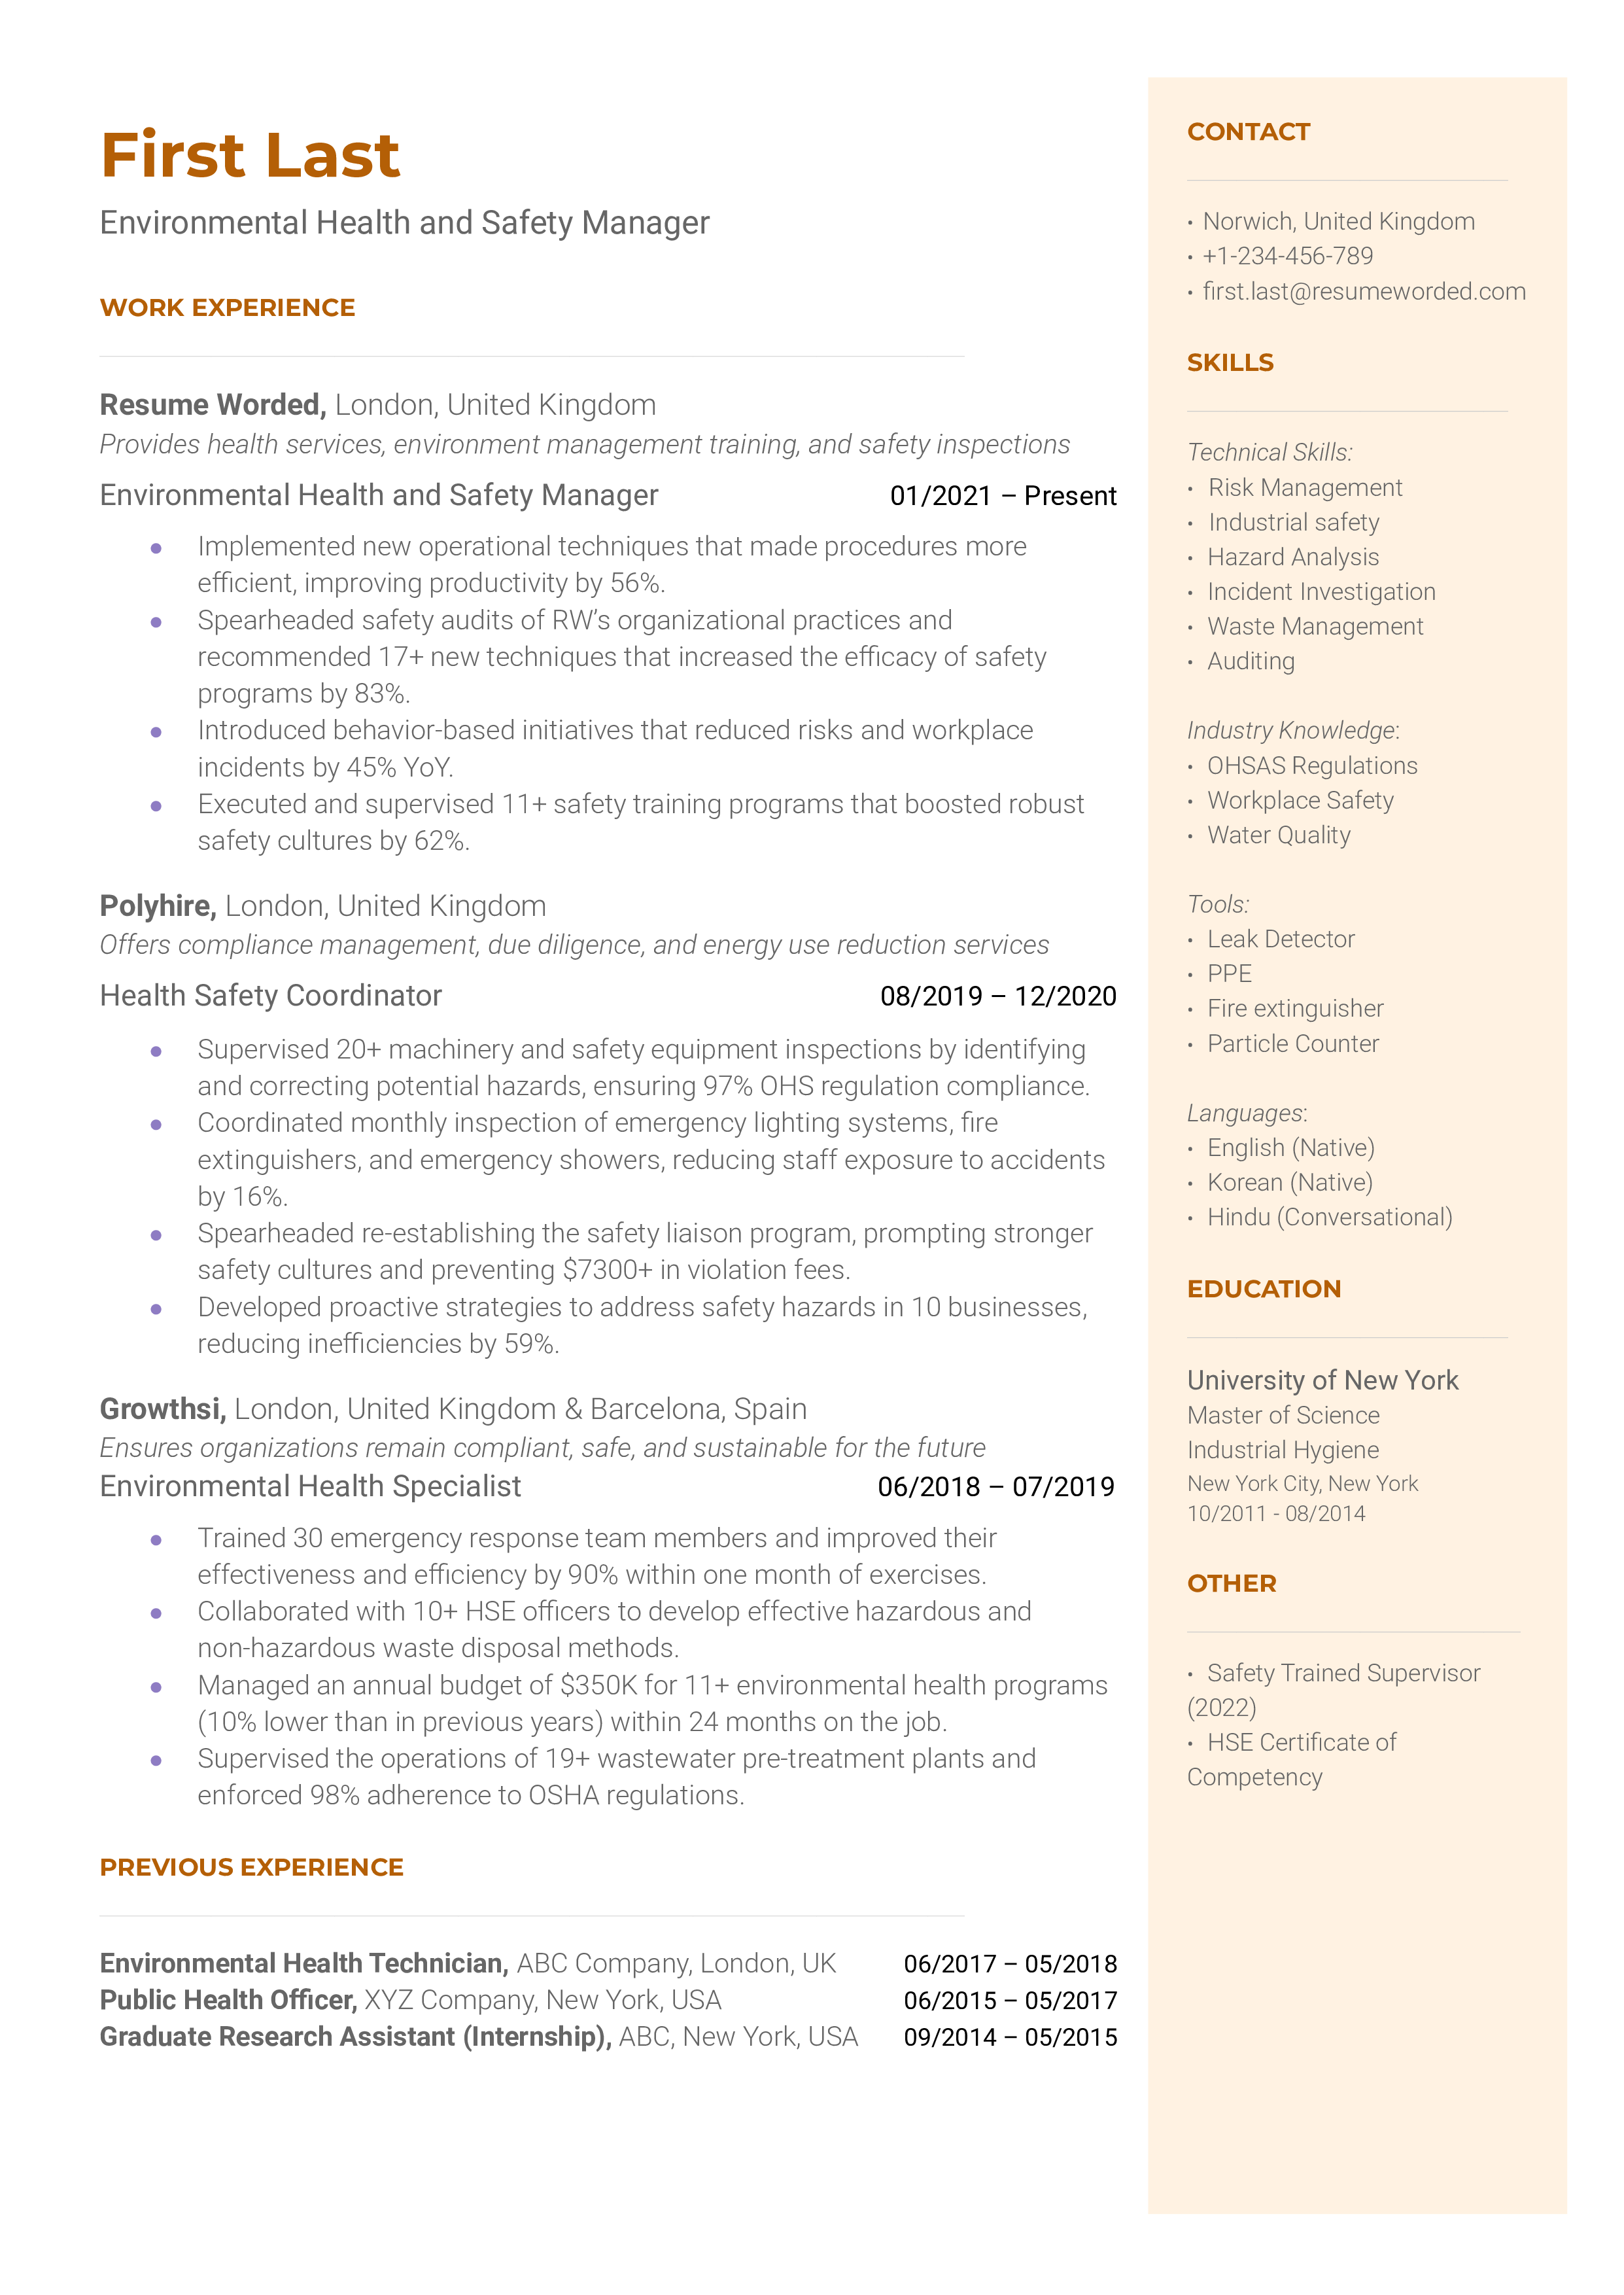 Environmental Health and Safety Manager Resume Sample